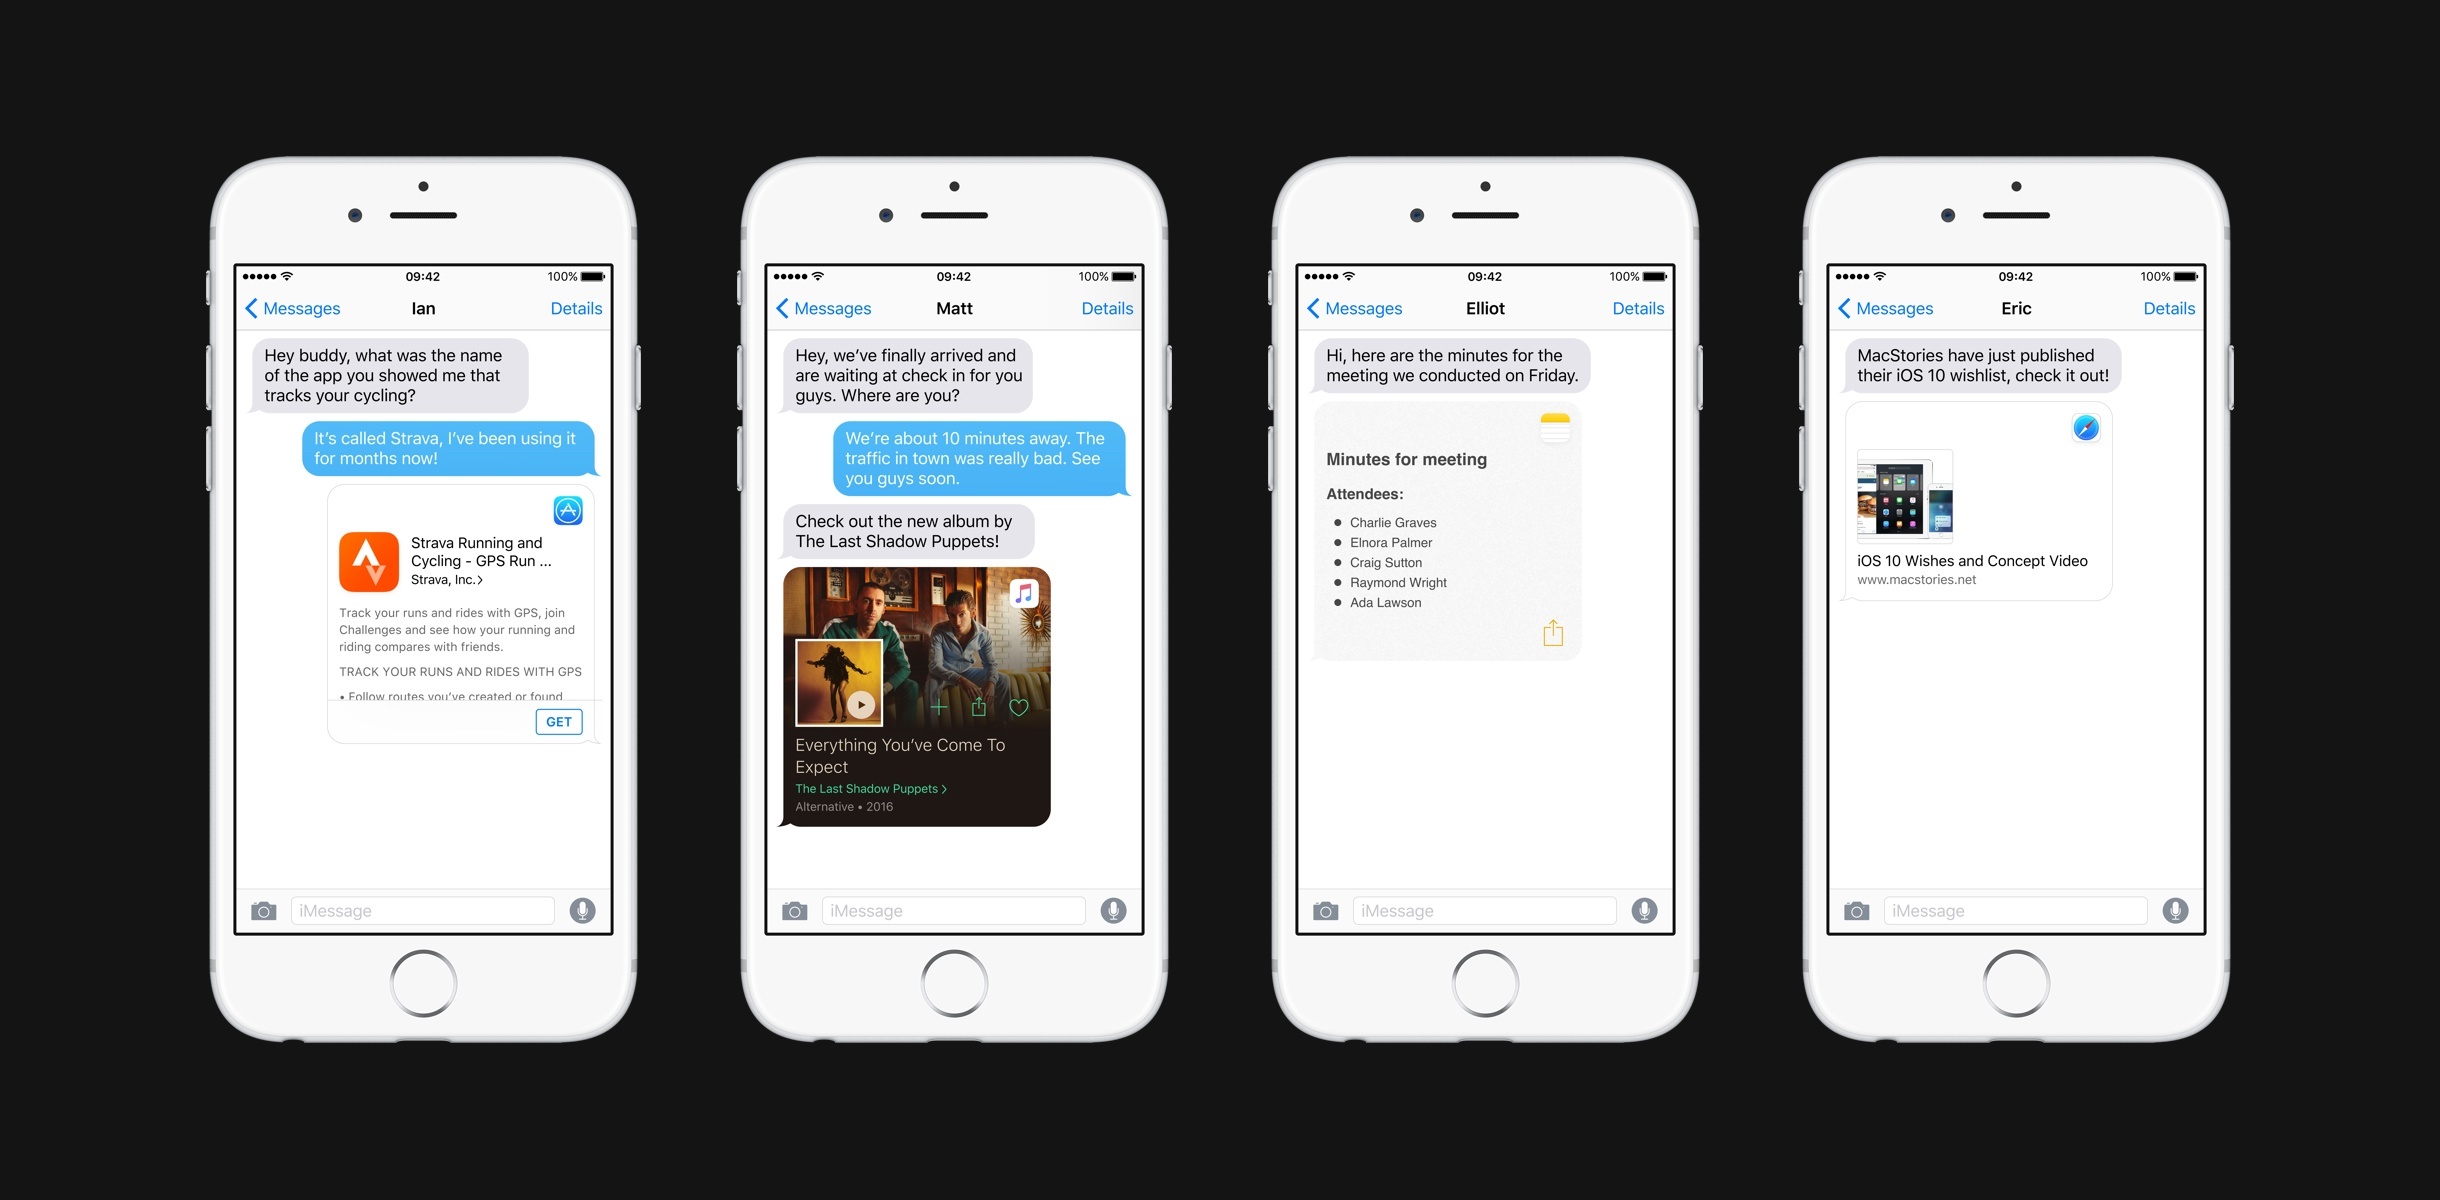 Rich previews in Messages for the App Store, Apple Music, Notes, and Safari content.